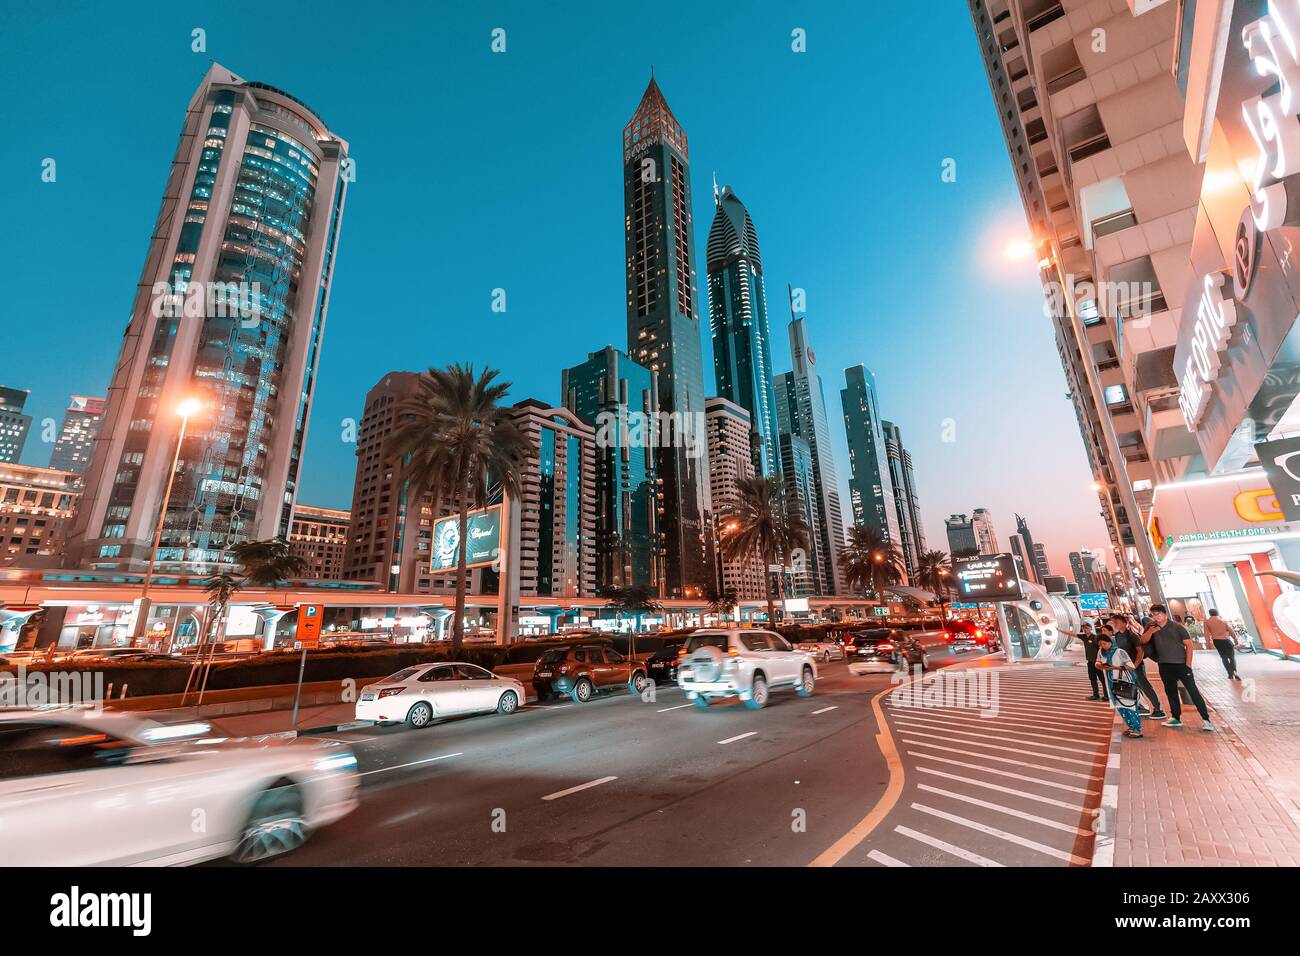 28 November 2019, UAE, Dubai: Sheikh Zayed road and numerous hotels and skyscrapers at night in Dubai Stock Photo